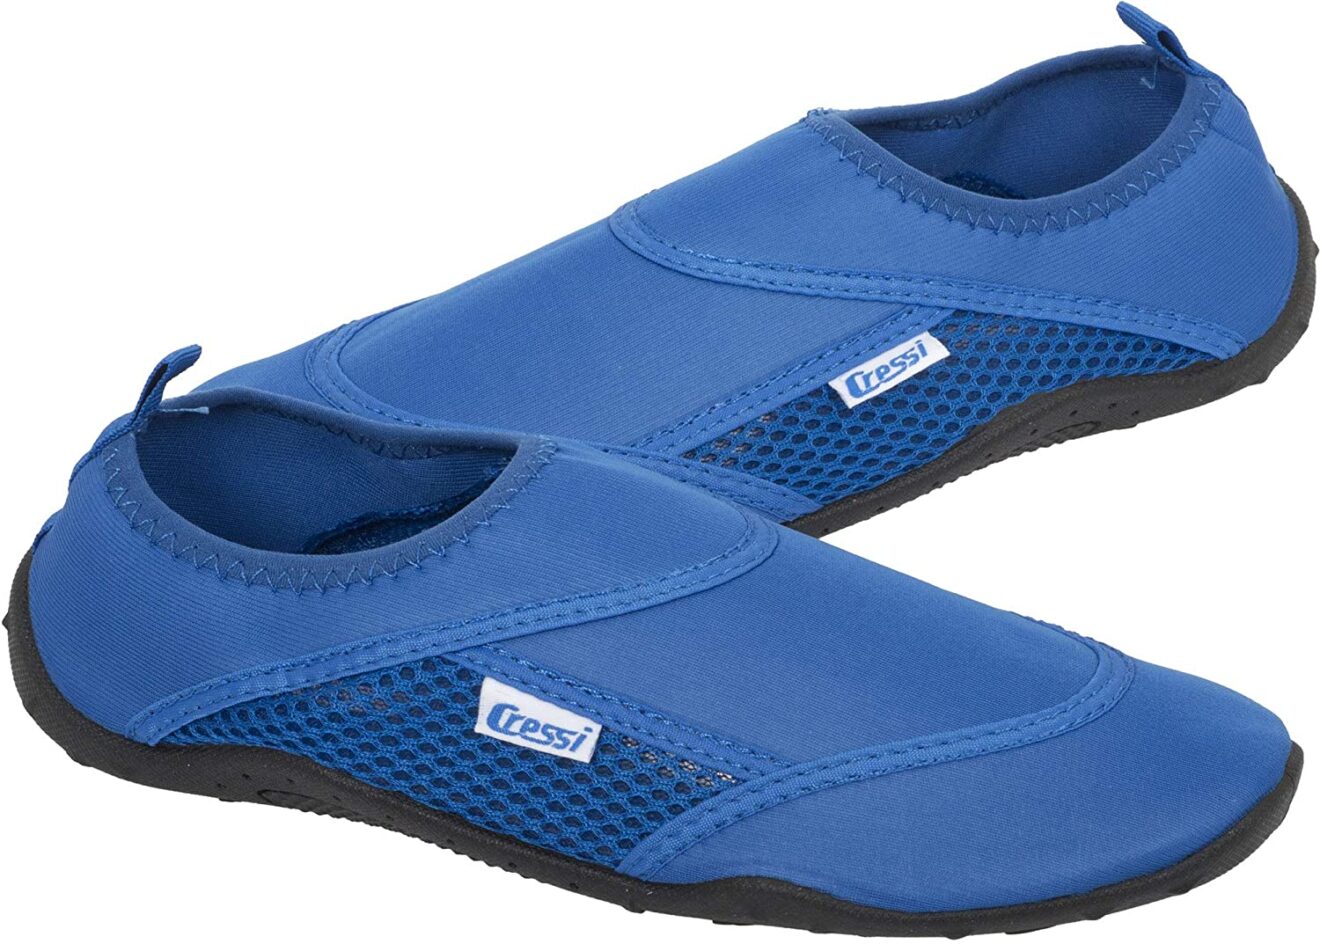 Cressi Water Shoes, Sports Shoes for Aquatic / Sea / Beach use for ...